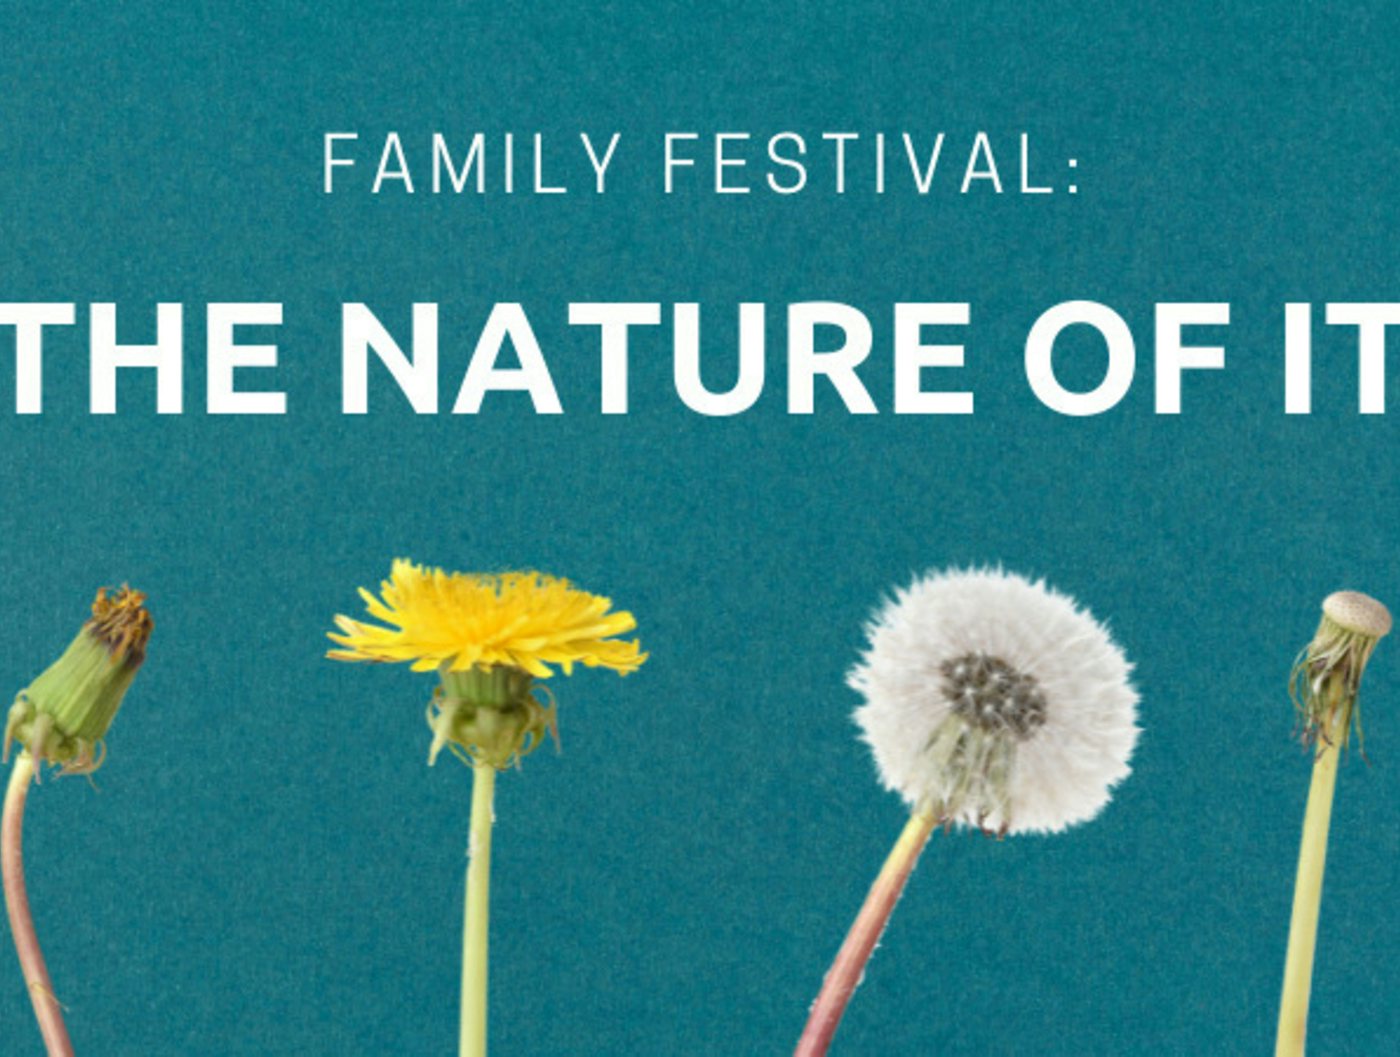 Family Festival: The Nature of It